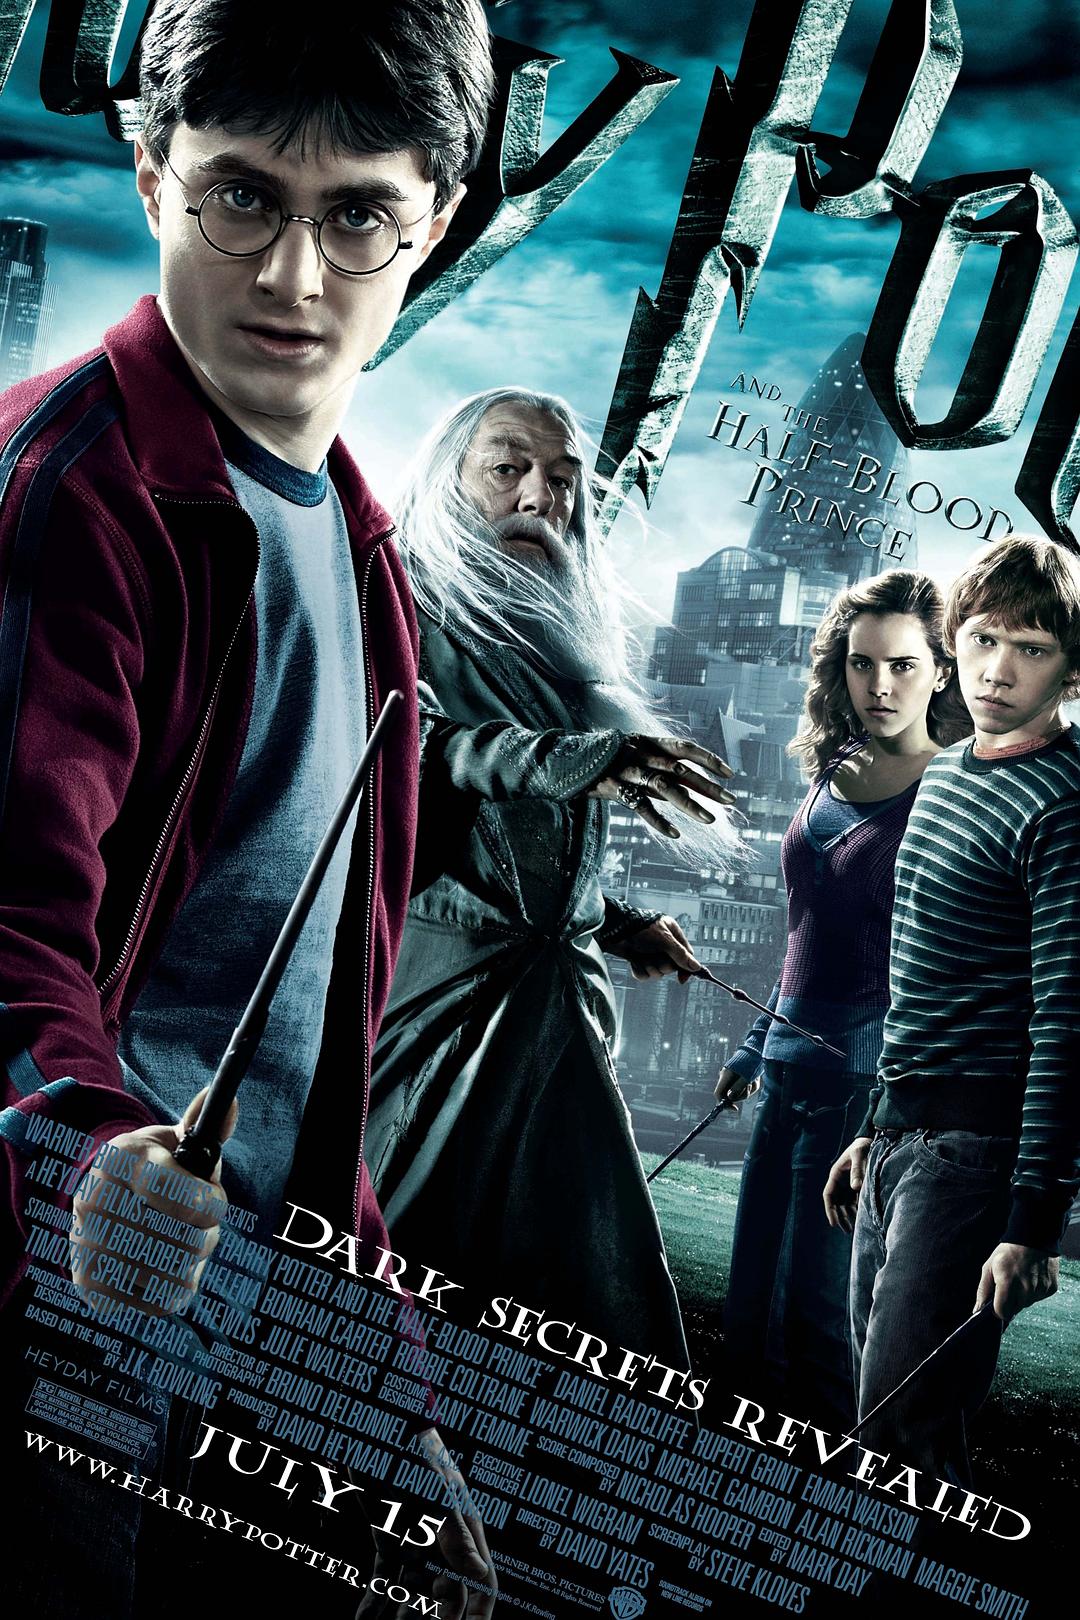 Ѫ Harry.Potter.and.the.Half-Blood.Prince.2009.1080p.BluRay.x264.DTS-X.7-1.png